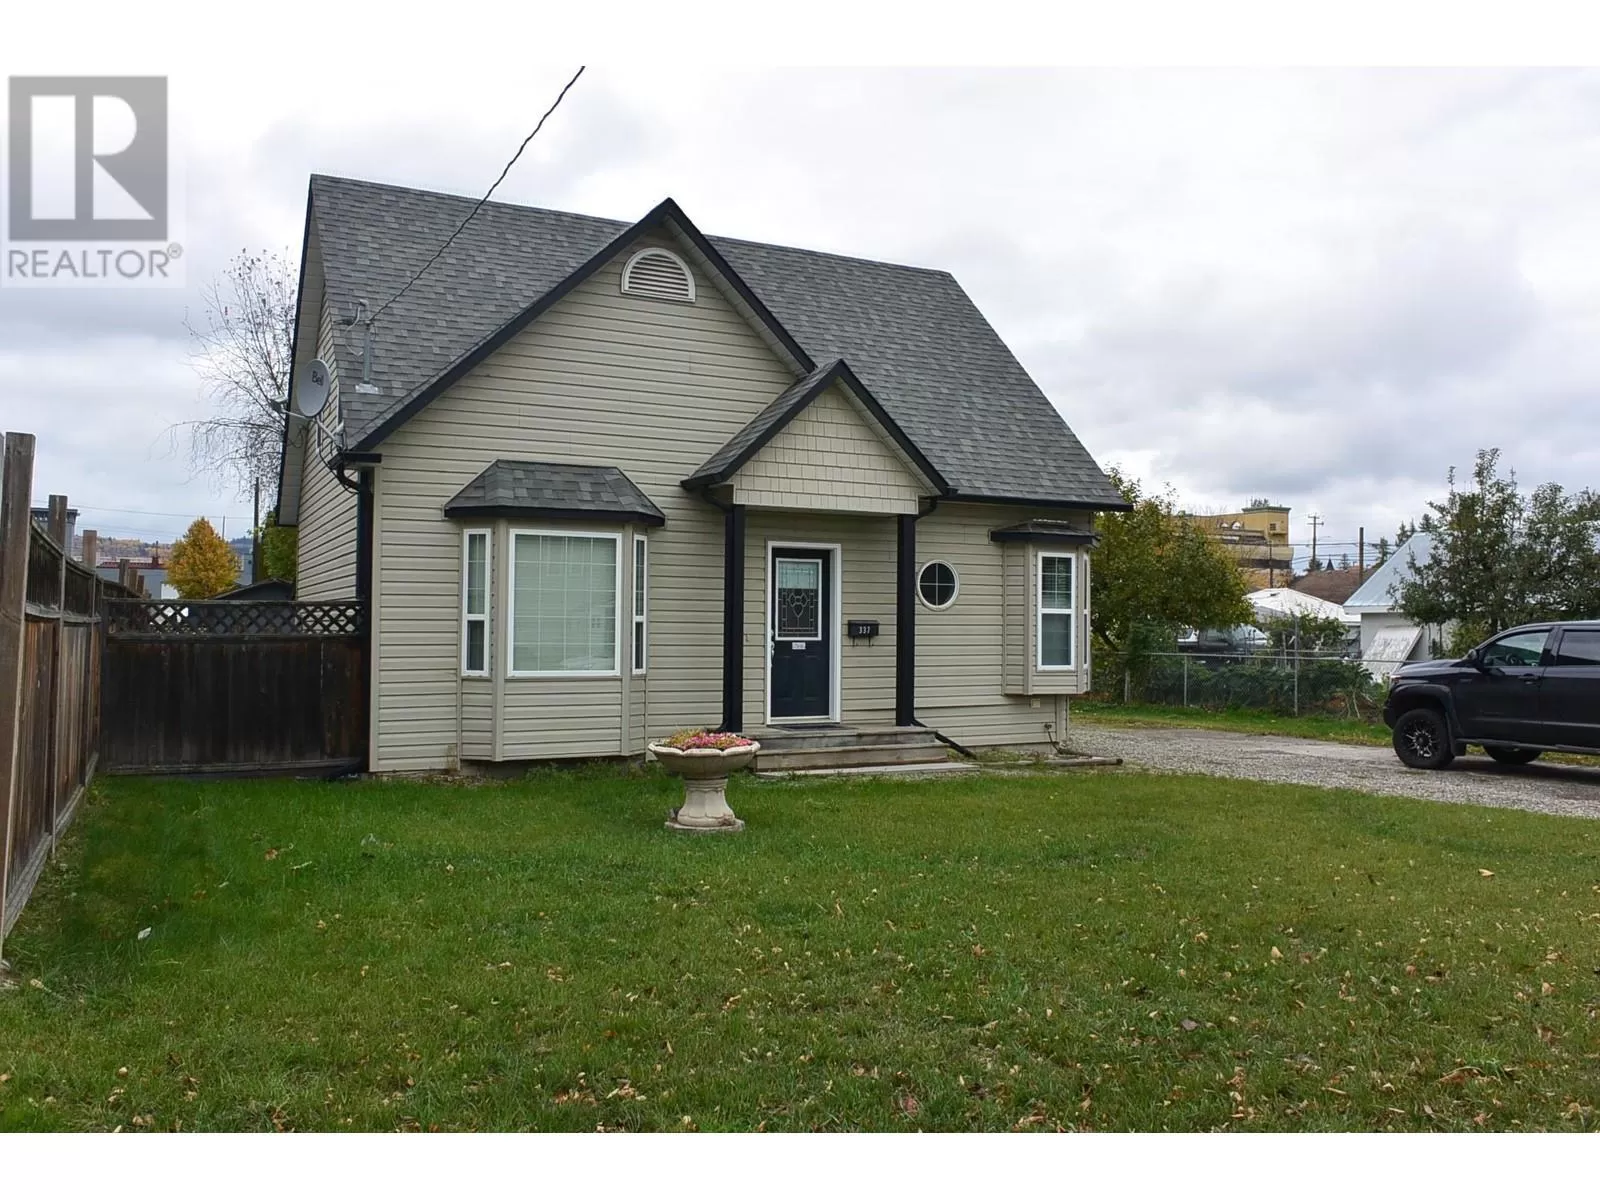 House for rent: 337 Callanan Street, Quesnel, British Columbia V2J 2T7